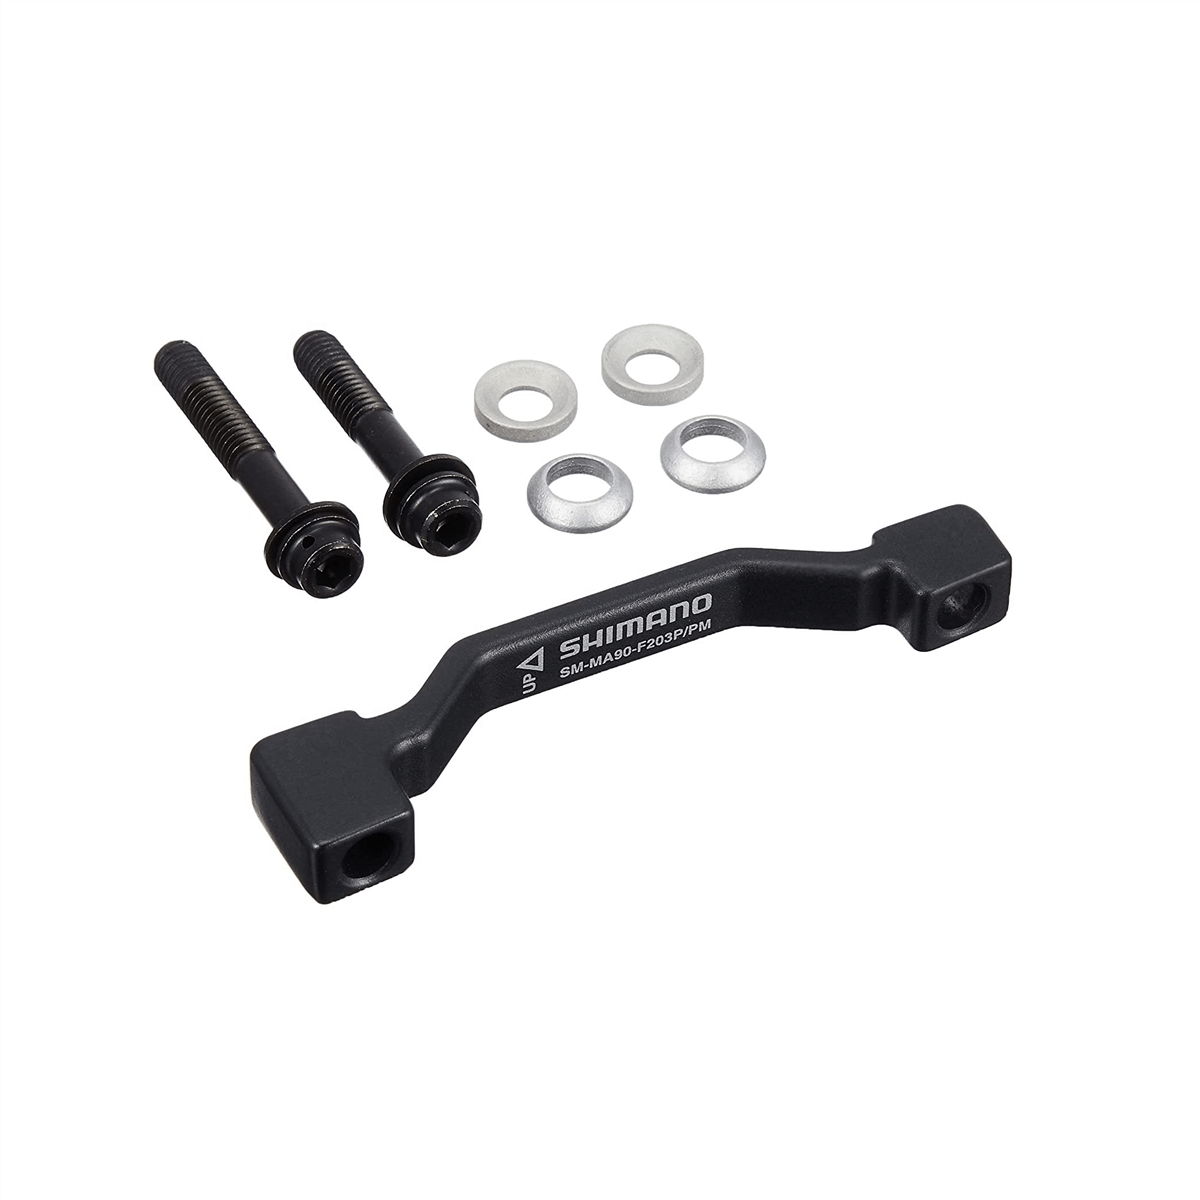 Shimano Shimano Mount Adapter for Disc Brake Caliper SM-MA90-F203P/PM, Ultimate series, for Post mount 180mm to 203mm